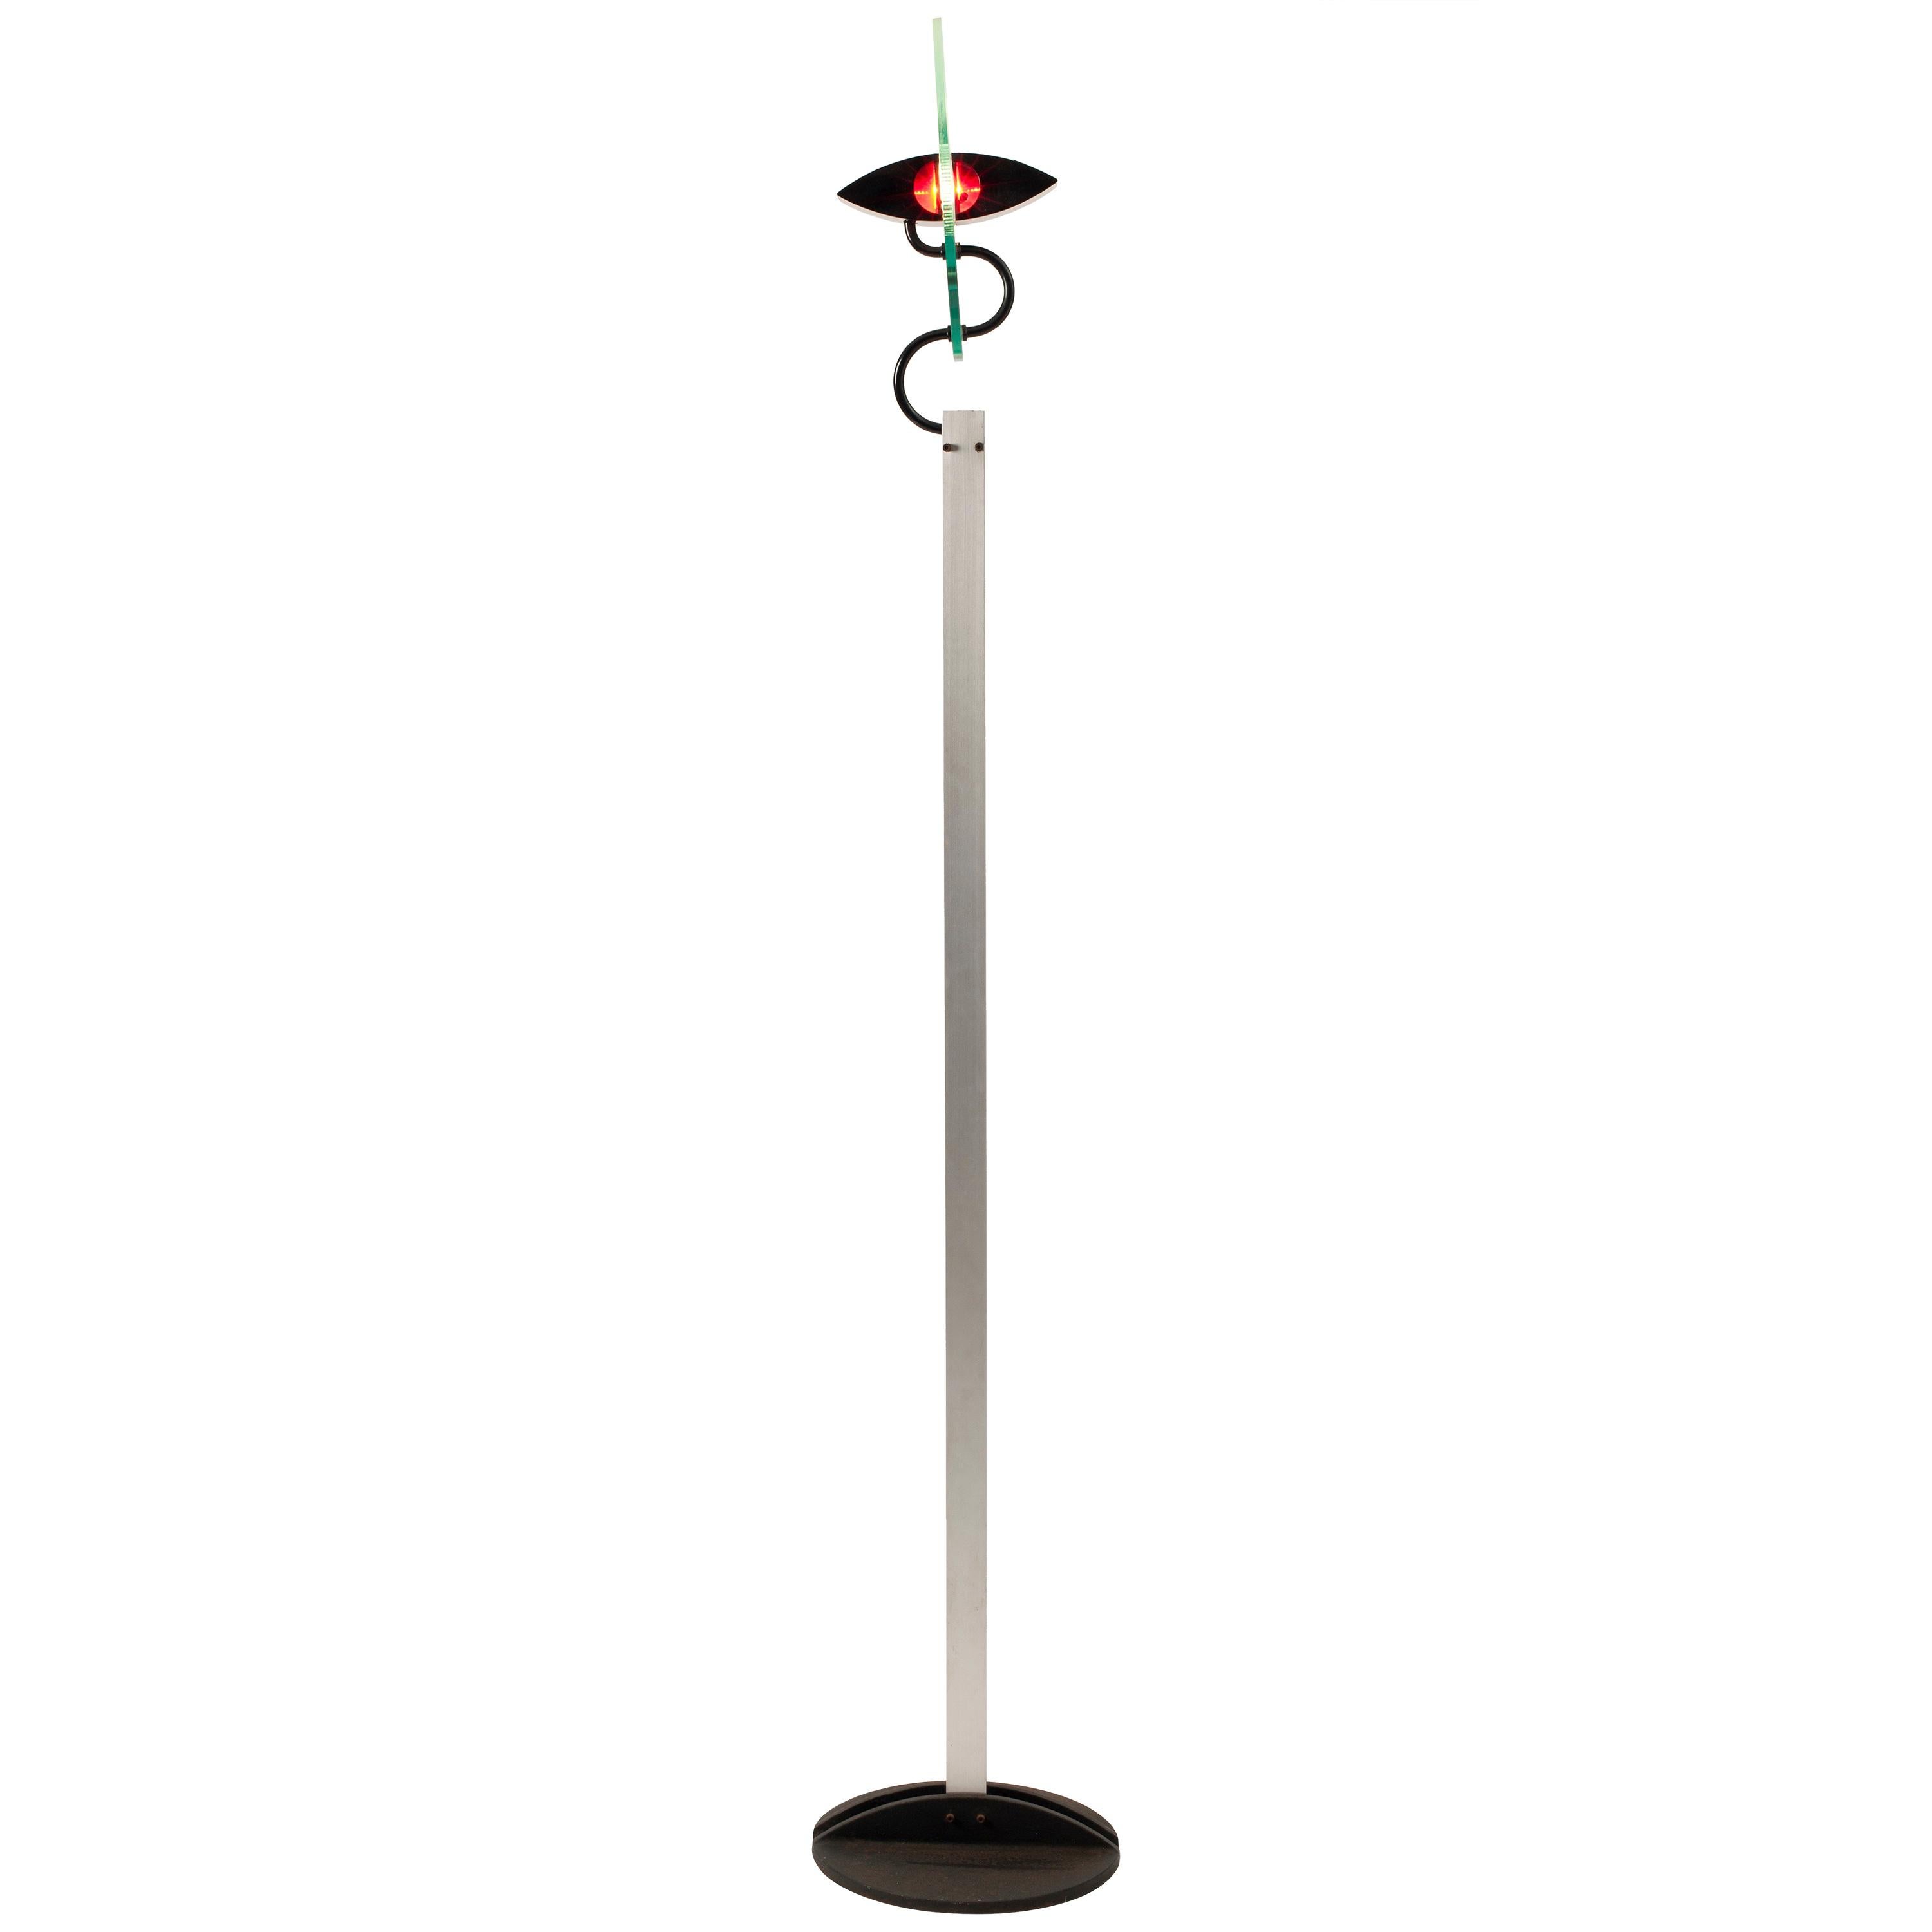 Olimpia Floor Lamp by Carlo Forcolini for Artemide, 1987 For Sale